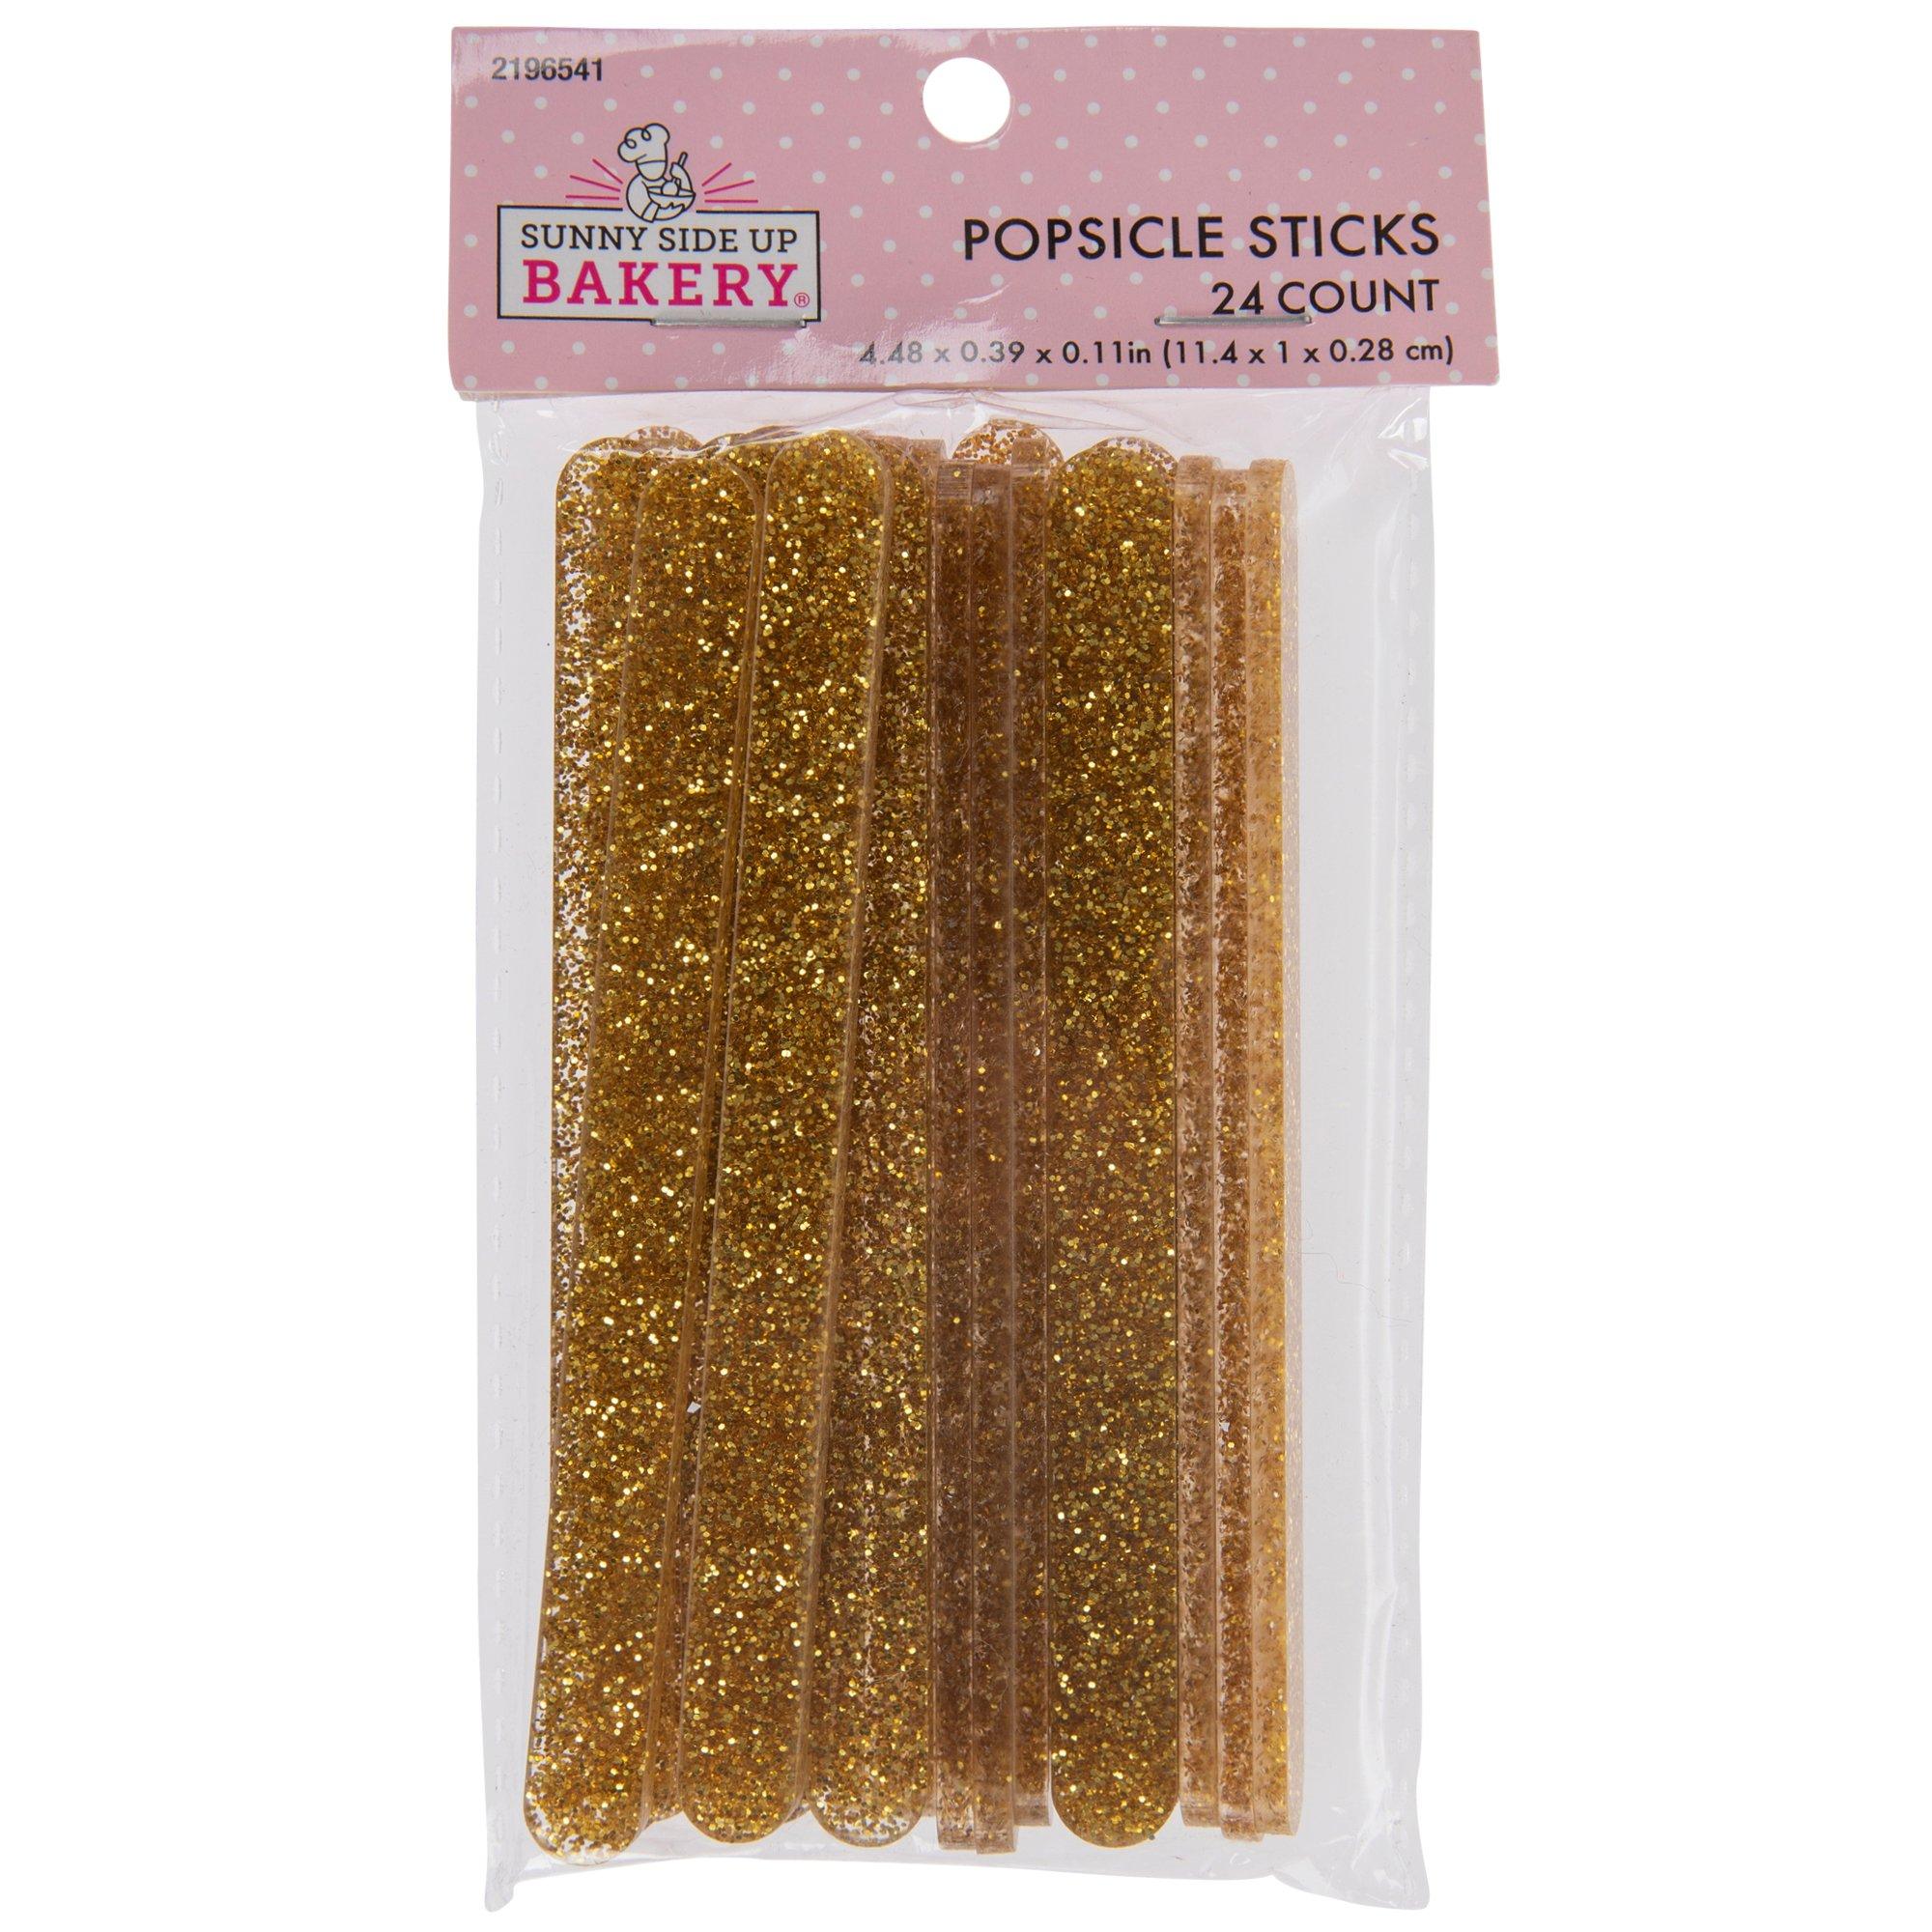 Shop Mirror Gold Popsicle Sticks: Gold Cakesicle Sticks 12 Count – Sprinkle  Bee Sweet